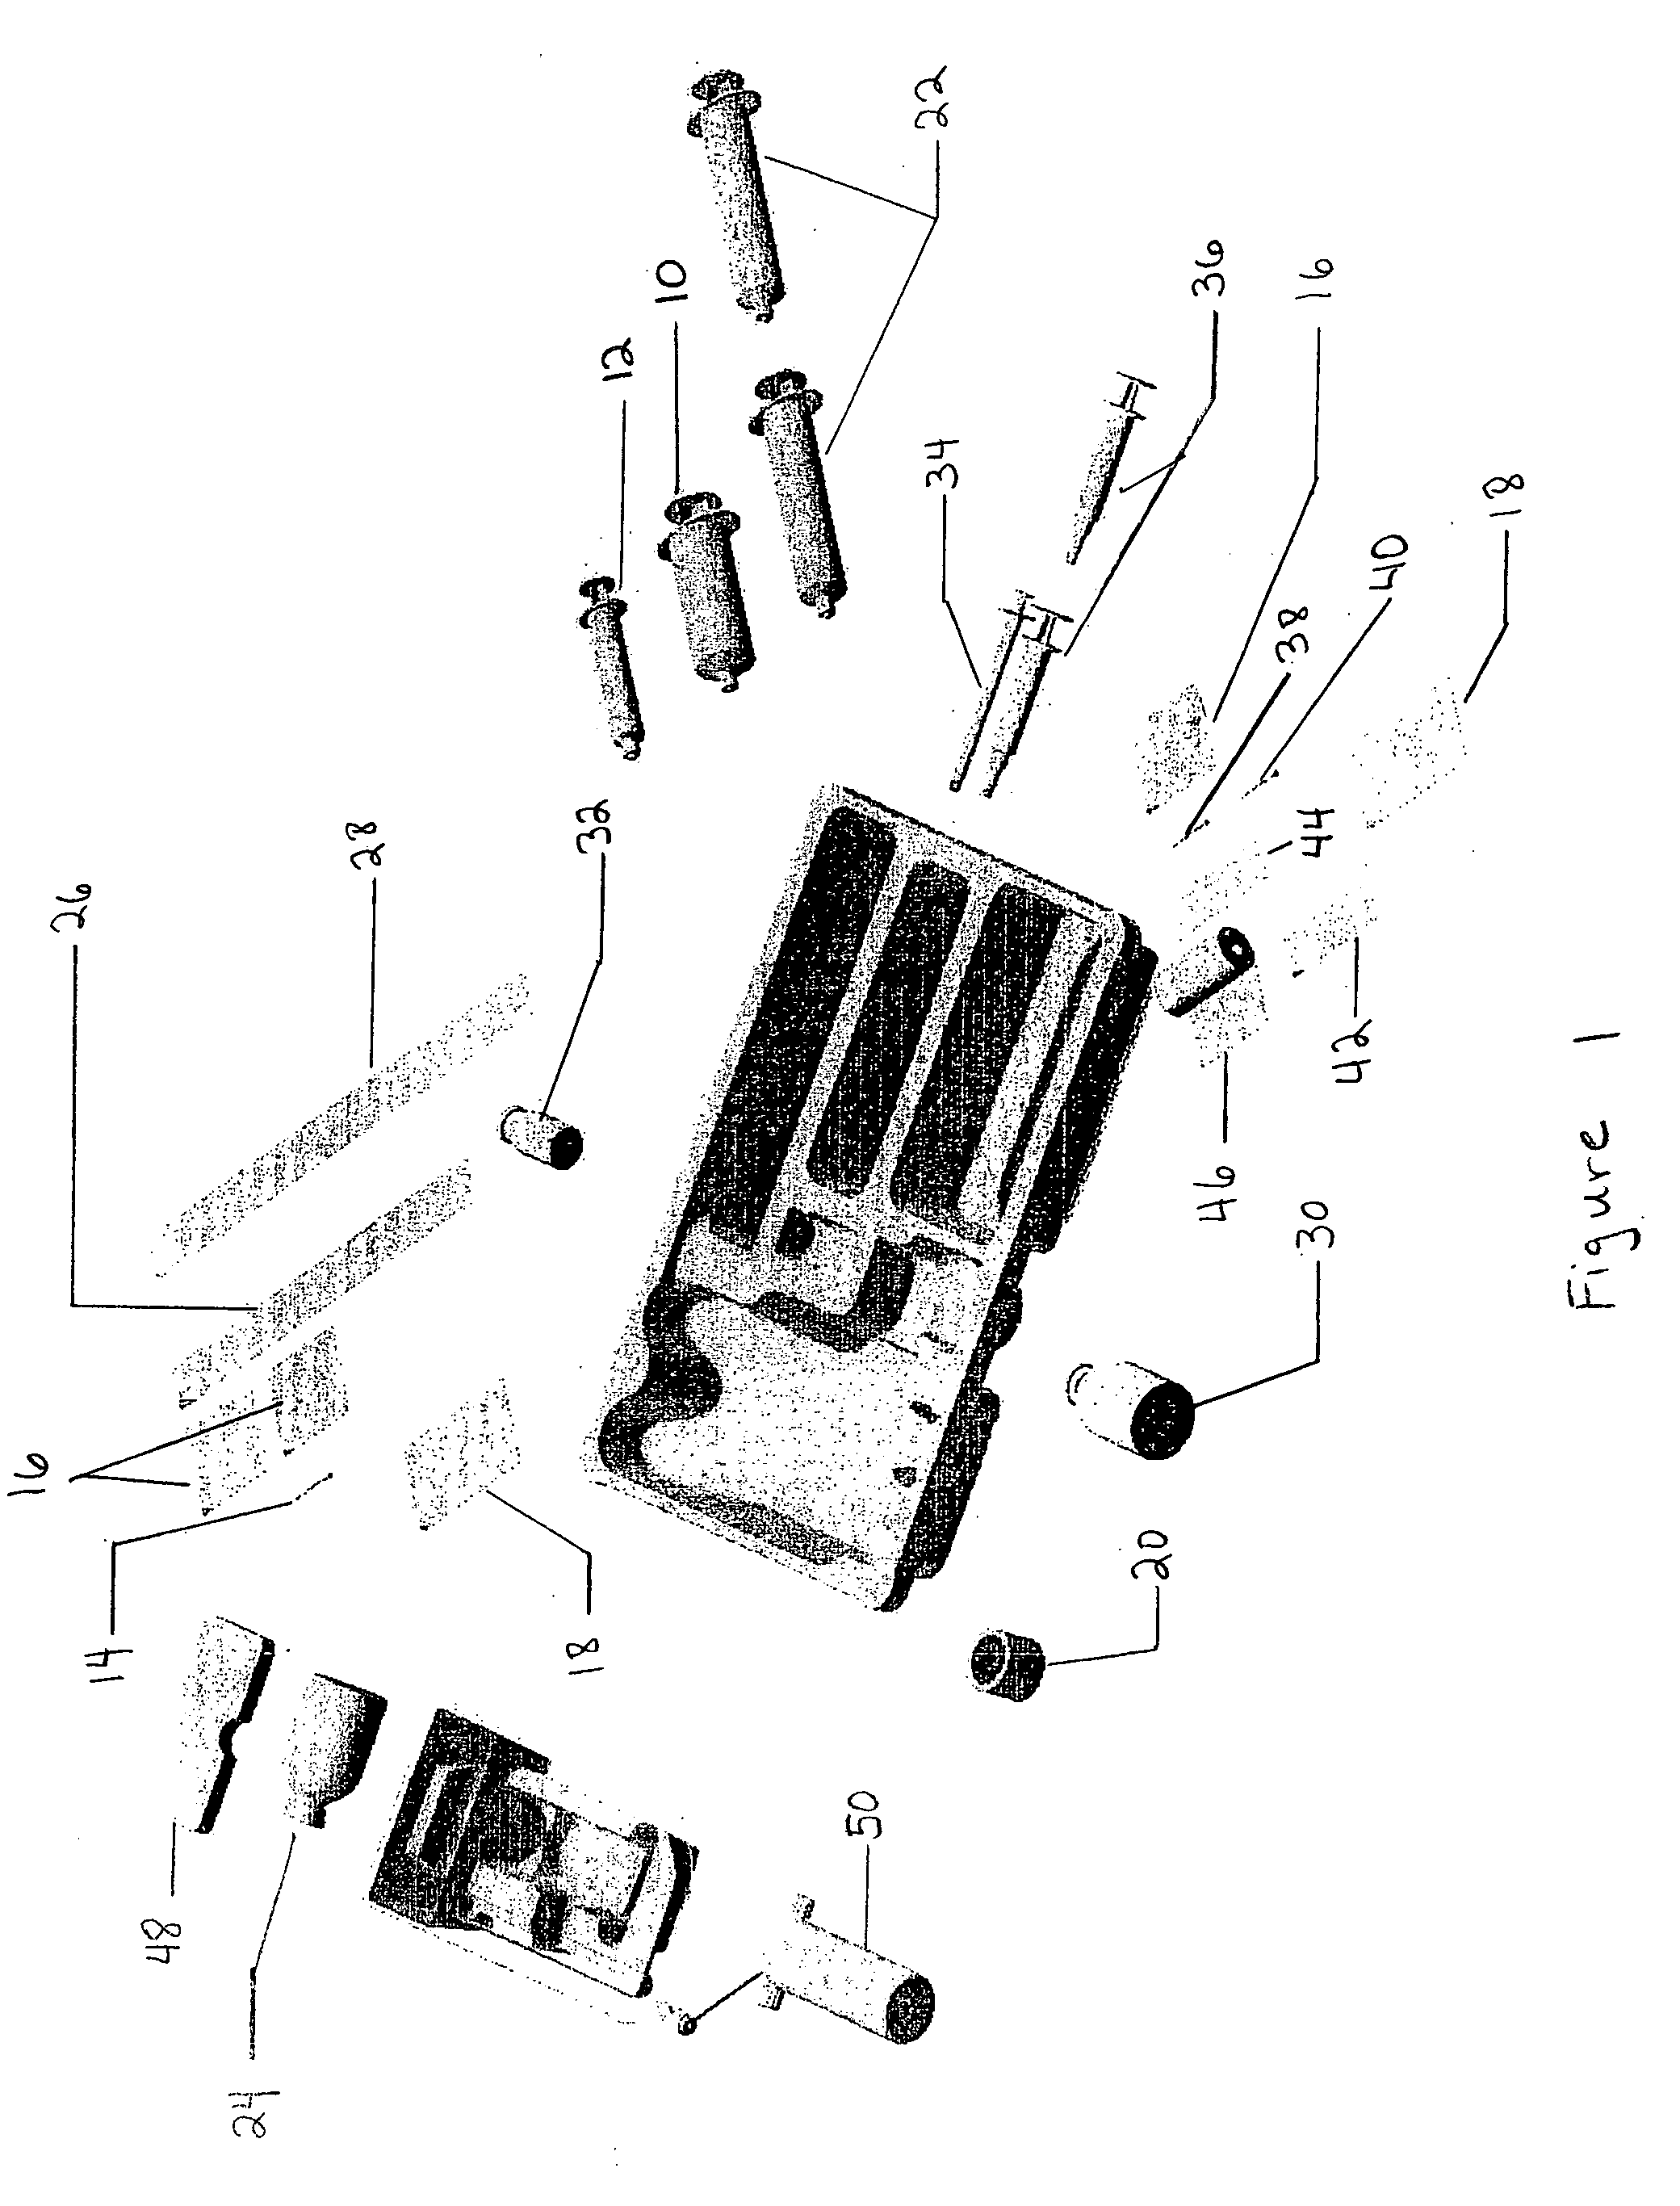 Method and kit for treatment of tissue injury